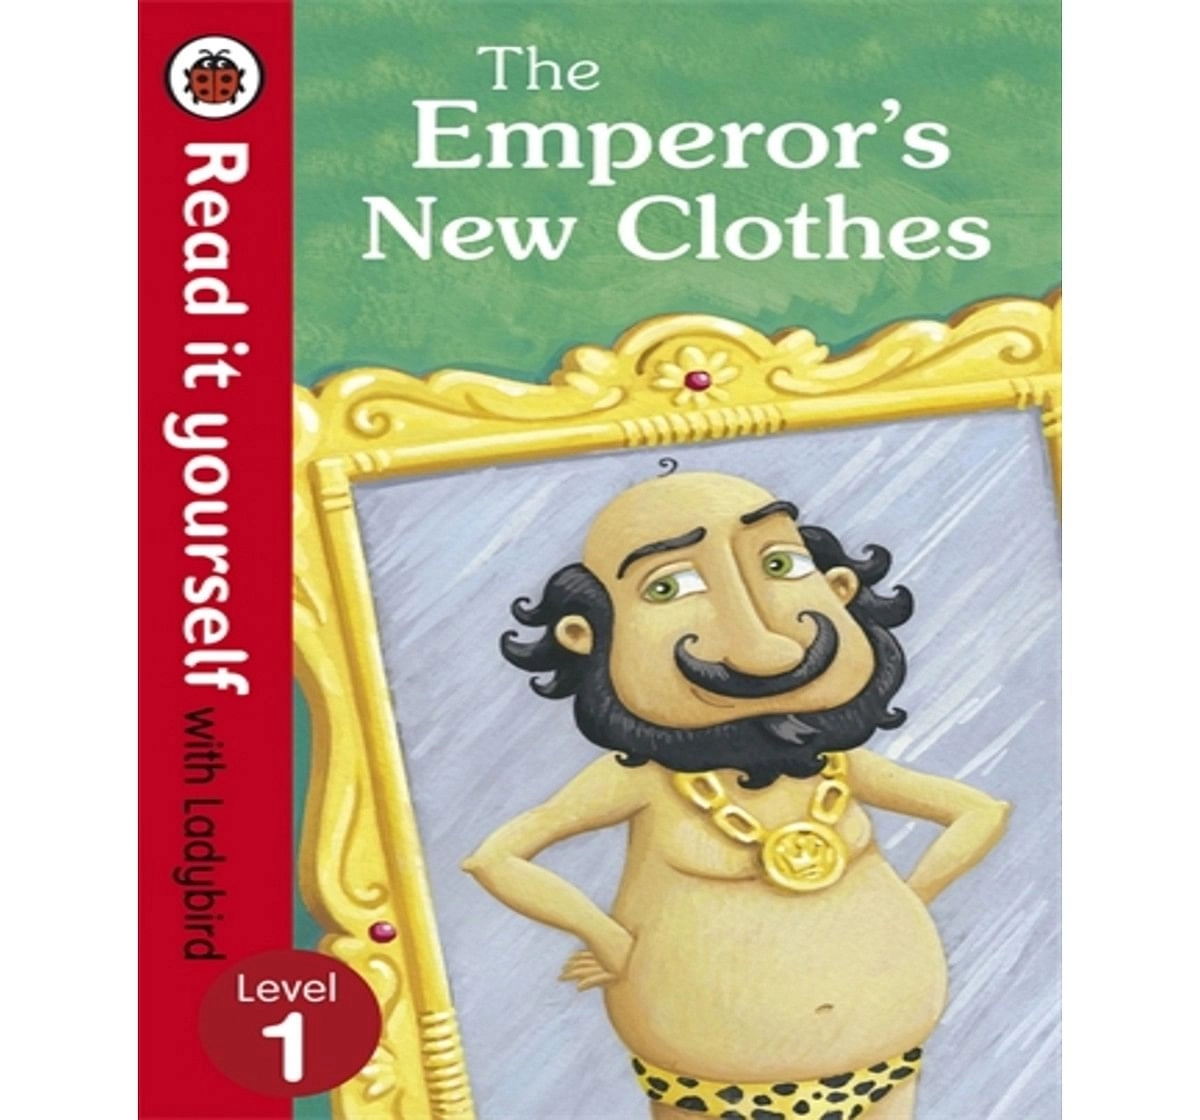 The Emperor's New Clothes: RIY (HB) Leve, 32 Pages Book by Ray, Marina Le, Hardback